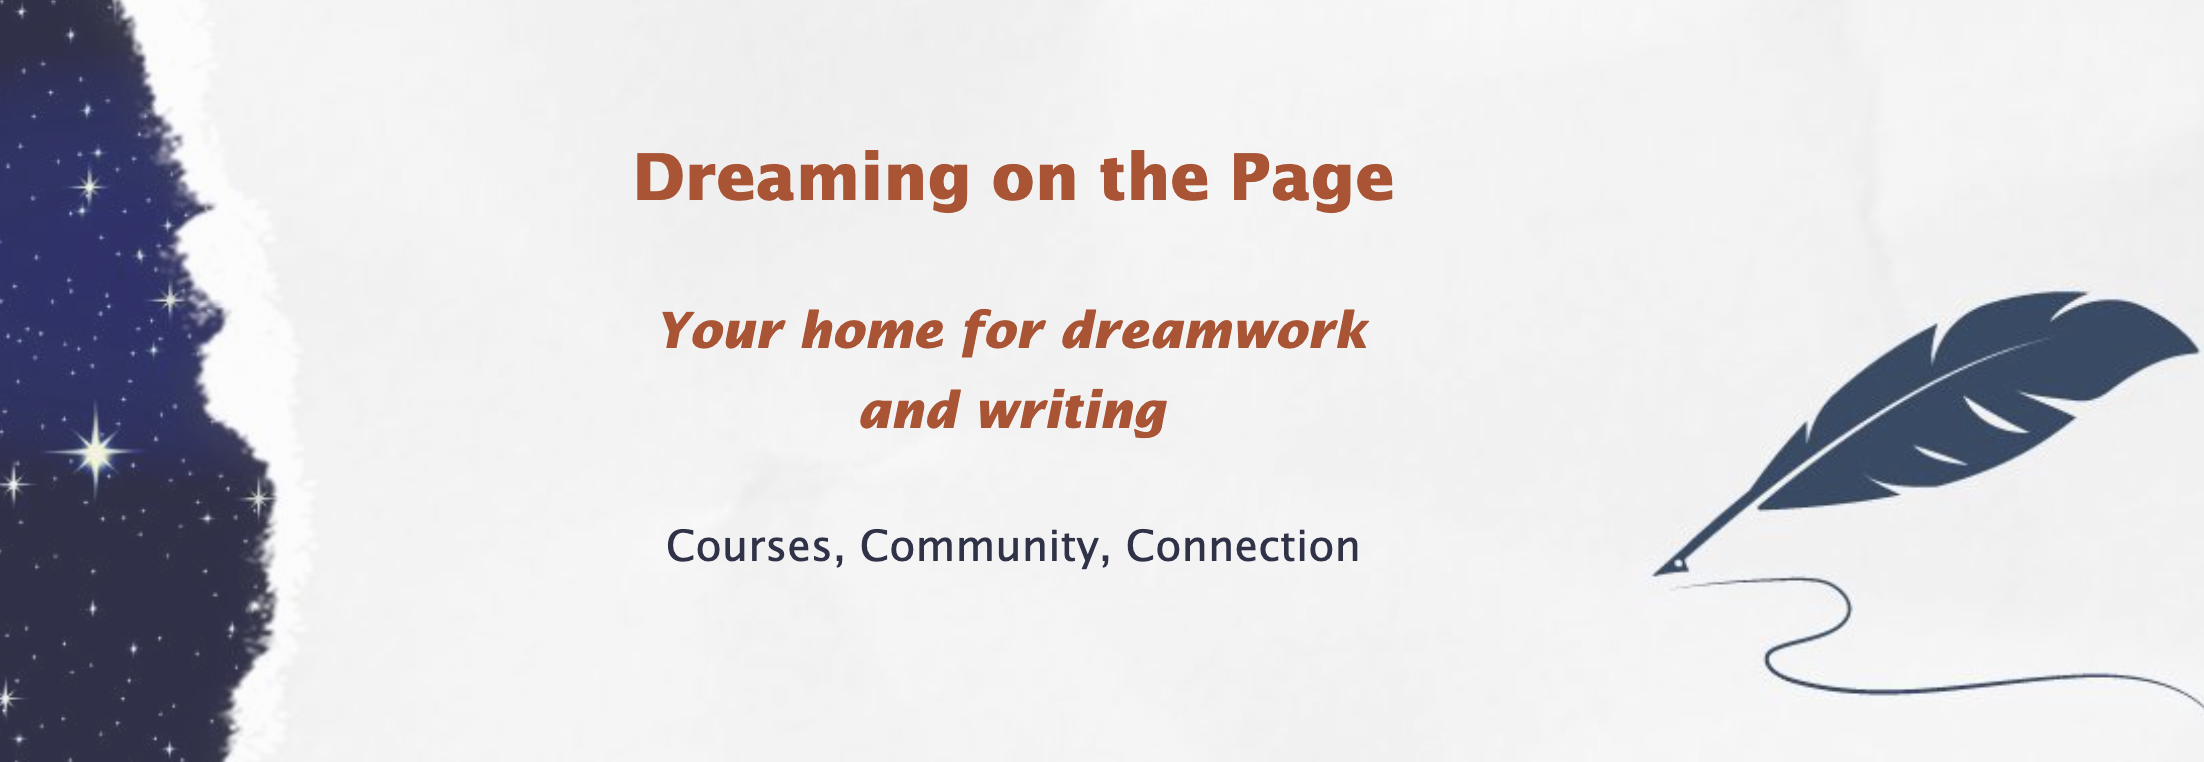 Dreaming on the Page Dreamwork and Writing Courses